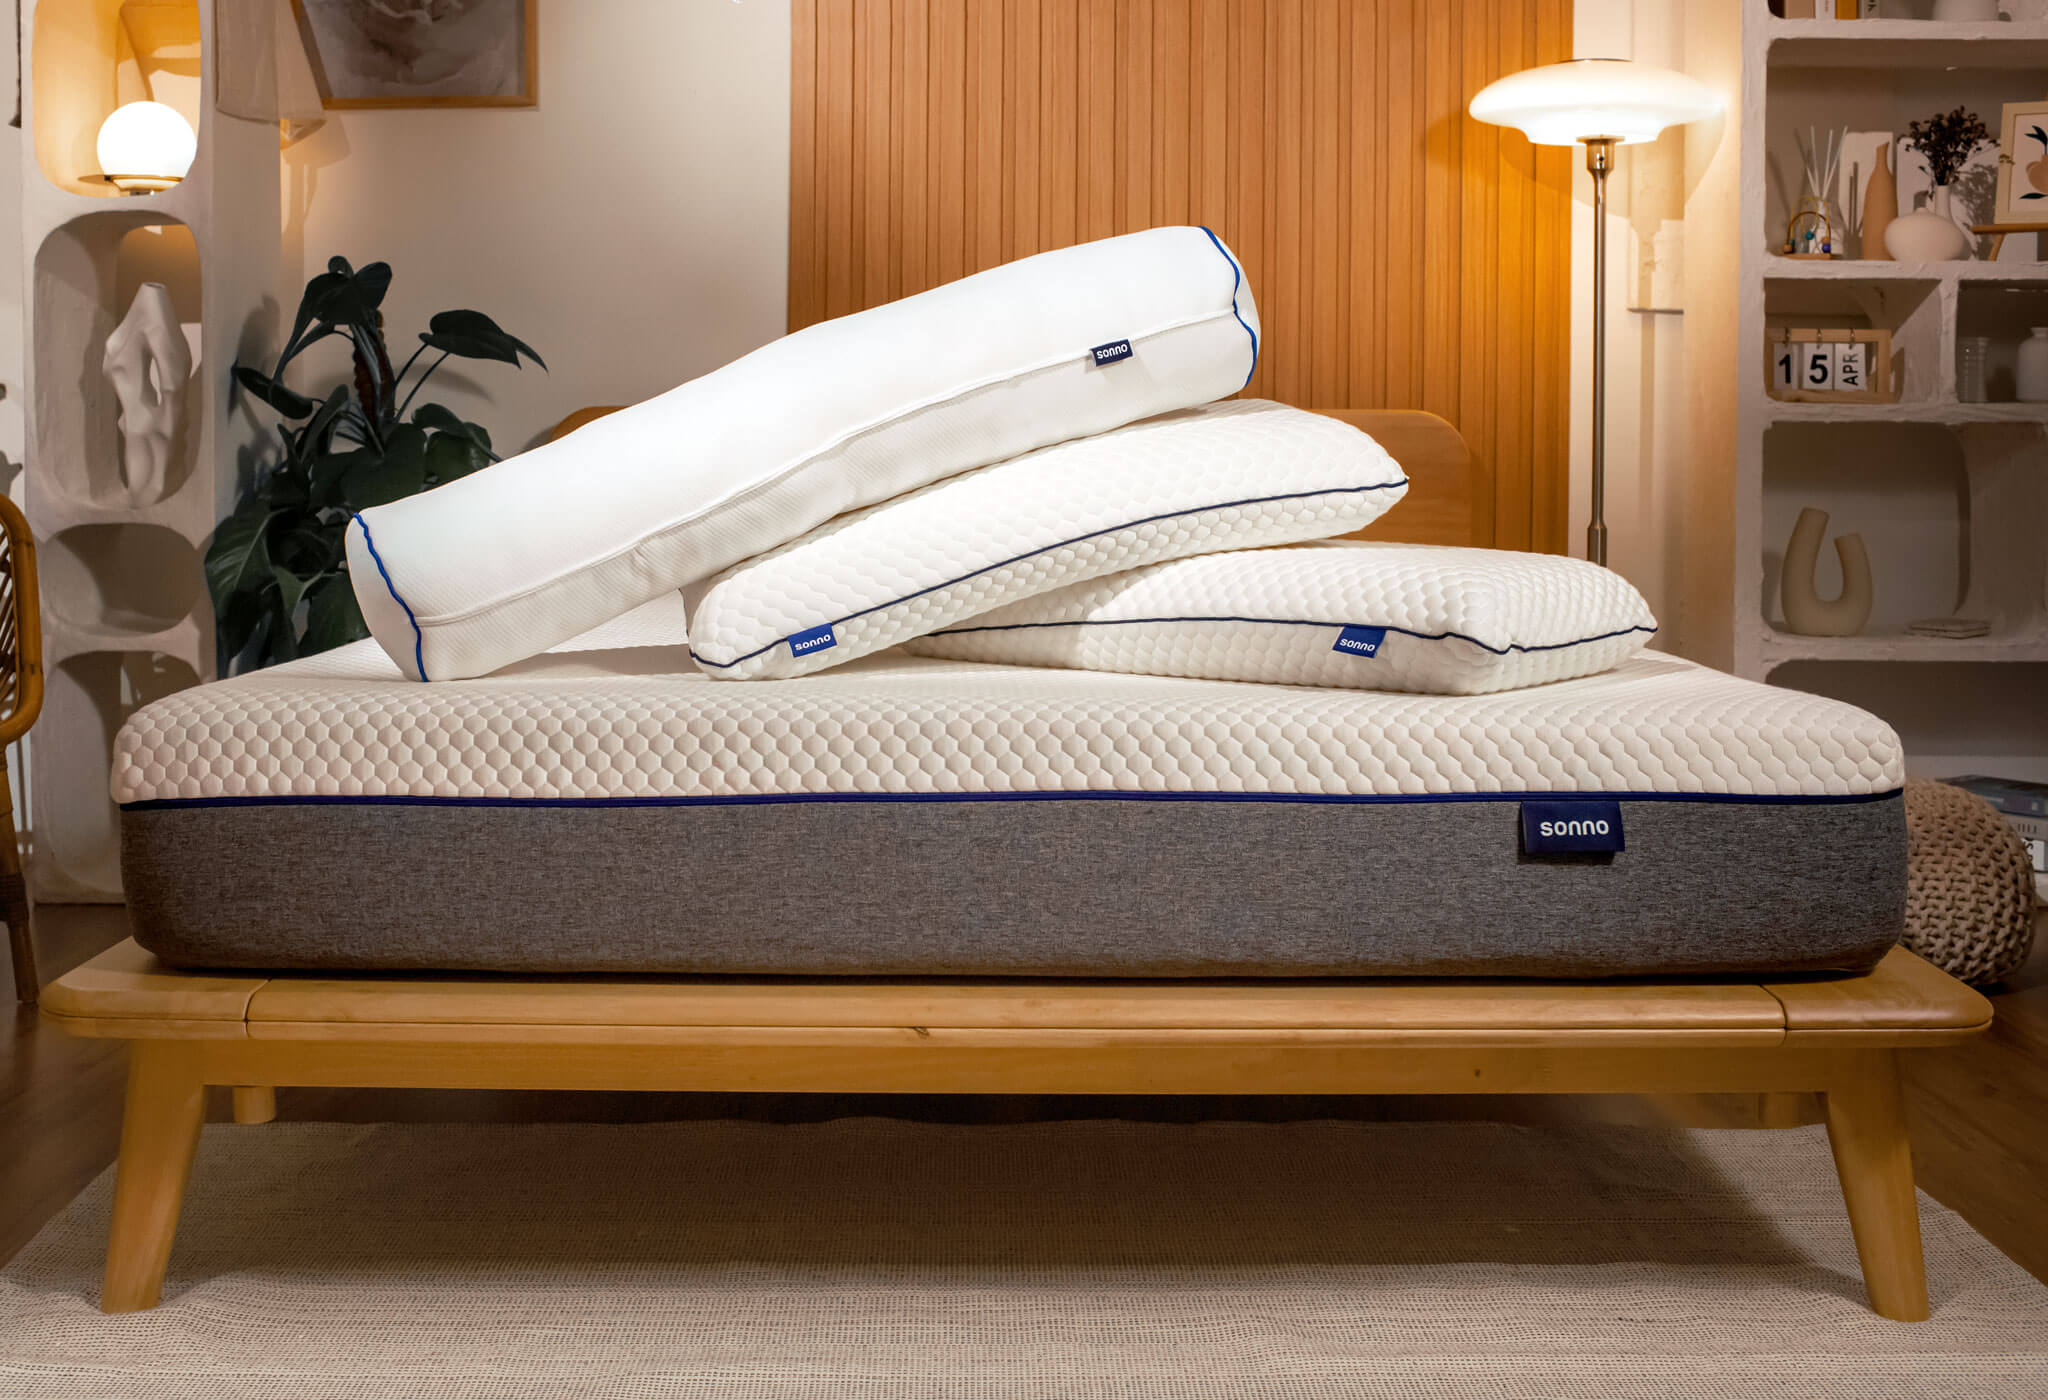 Sonno Bolster and Sonno Pillow layered on a Sonno Original Mattress in a Japandi bedroom